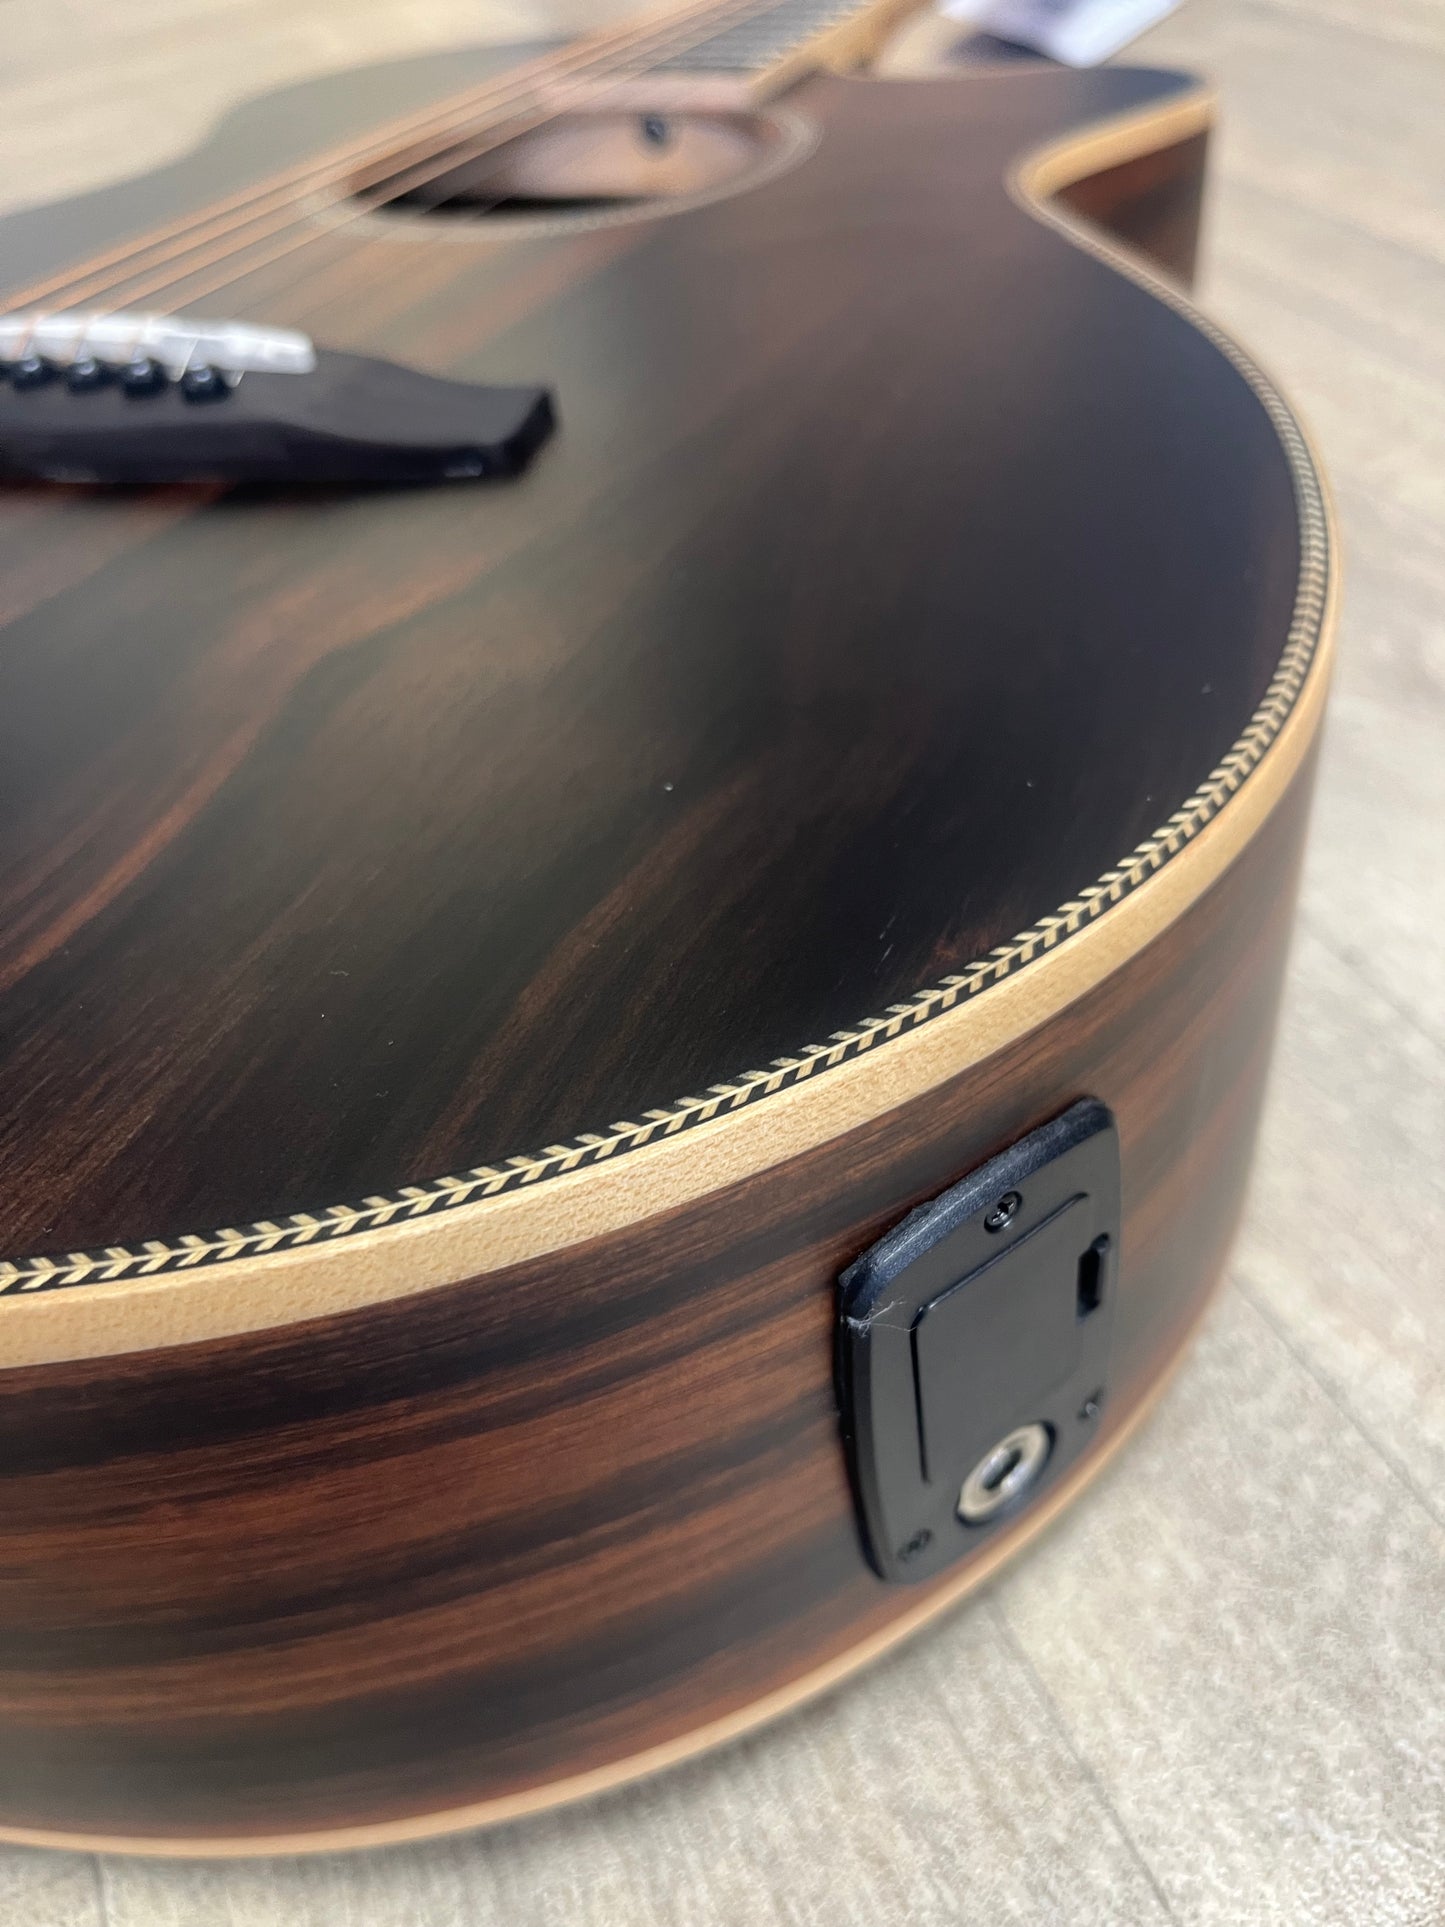 Reunion Pro Ebony Electro Acoustic with Solid Top for ultimate sound quality